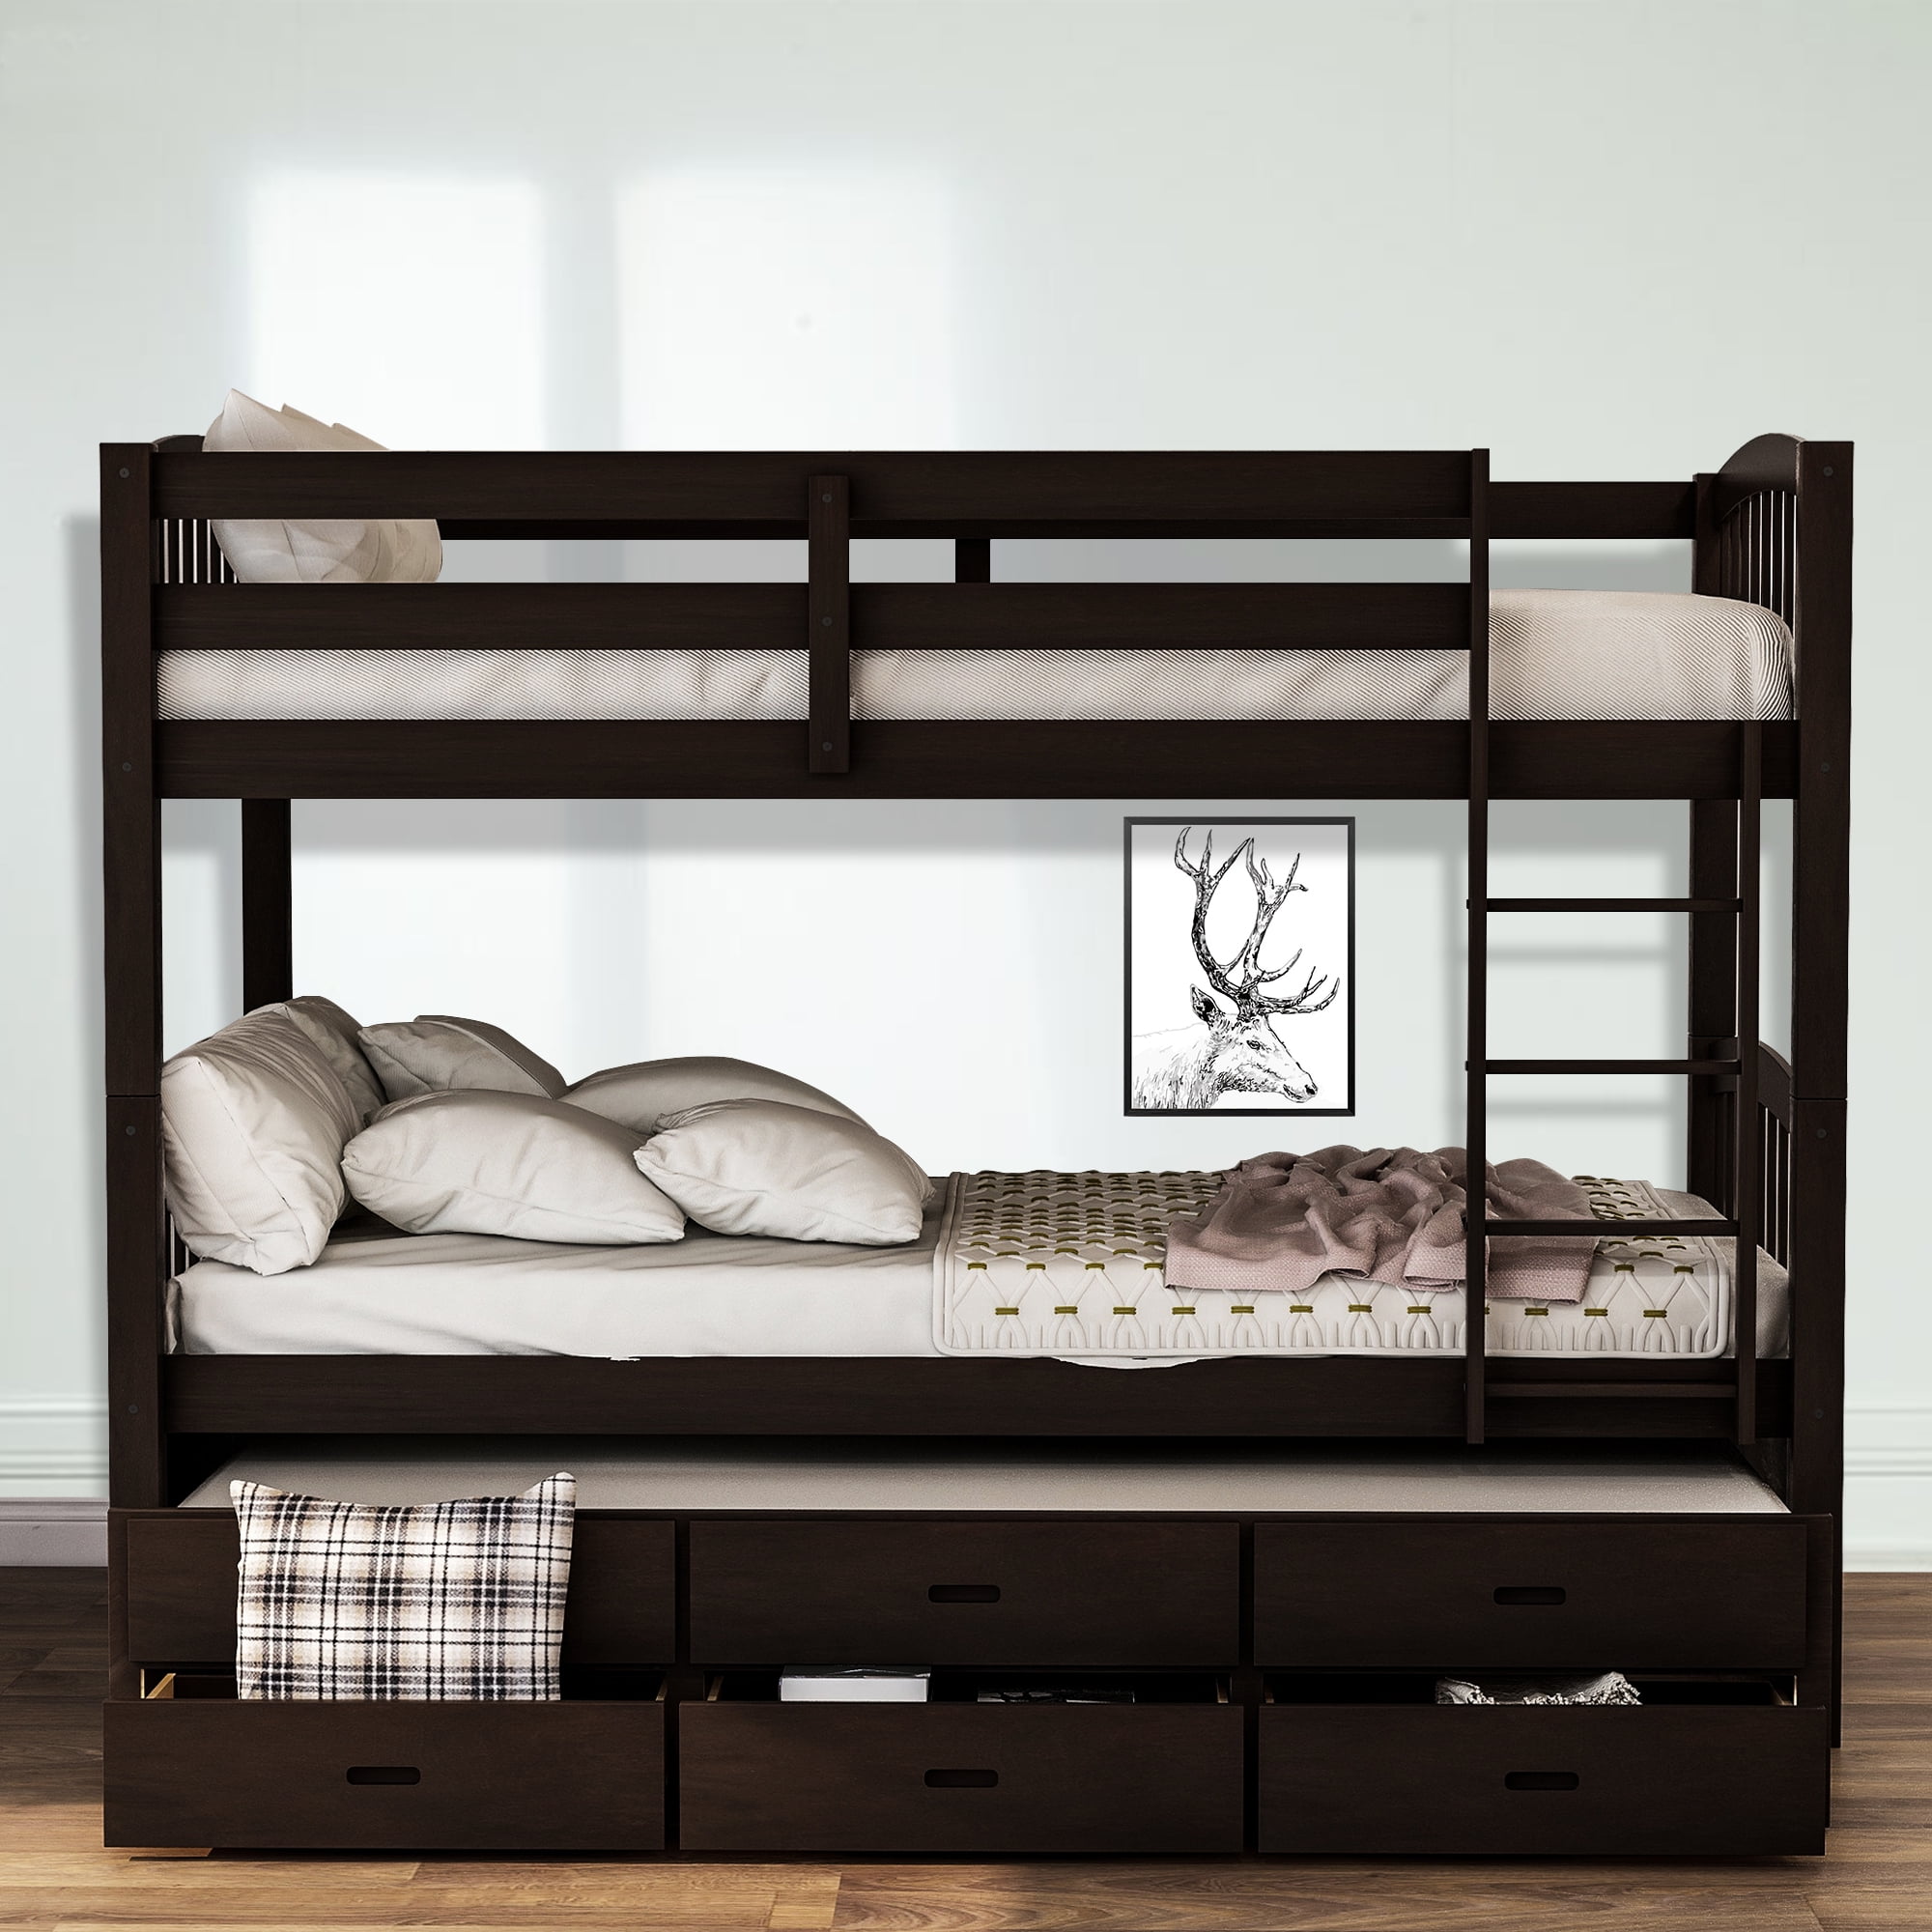 Details about   Espresso Brown Wooden Twin Over Twin Bunk Bed Kids Convertible Bedroom Furniture 